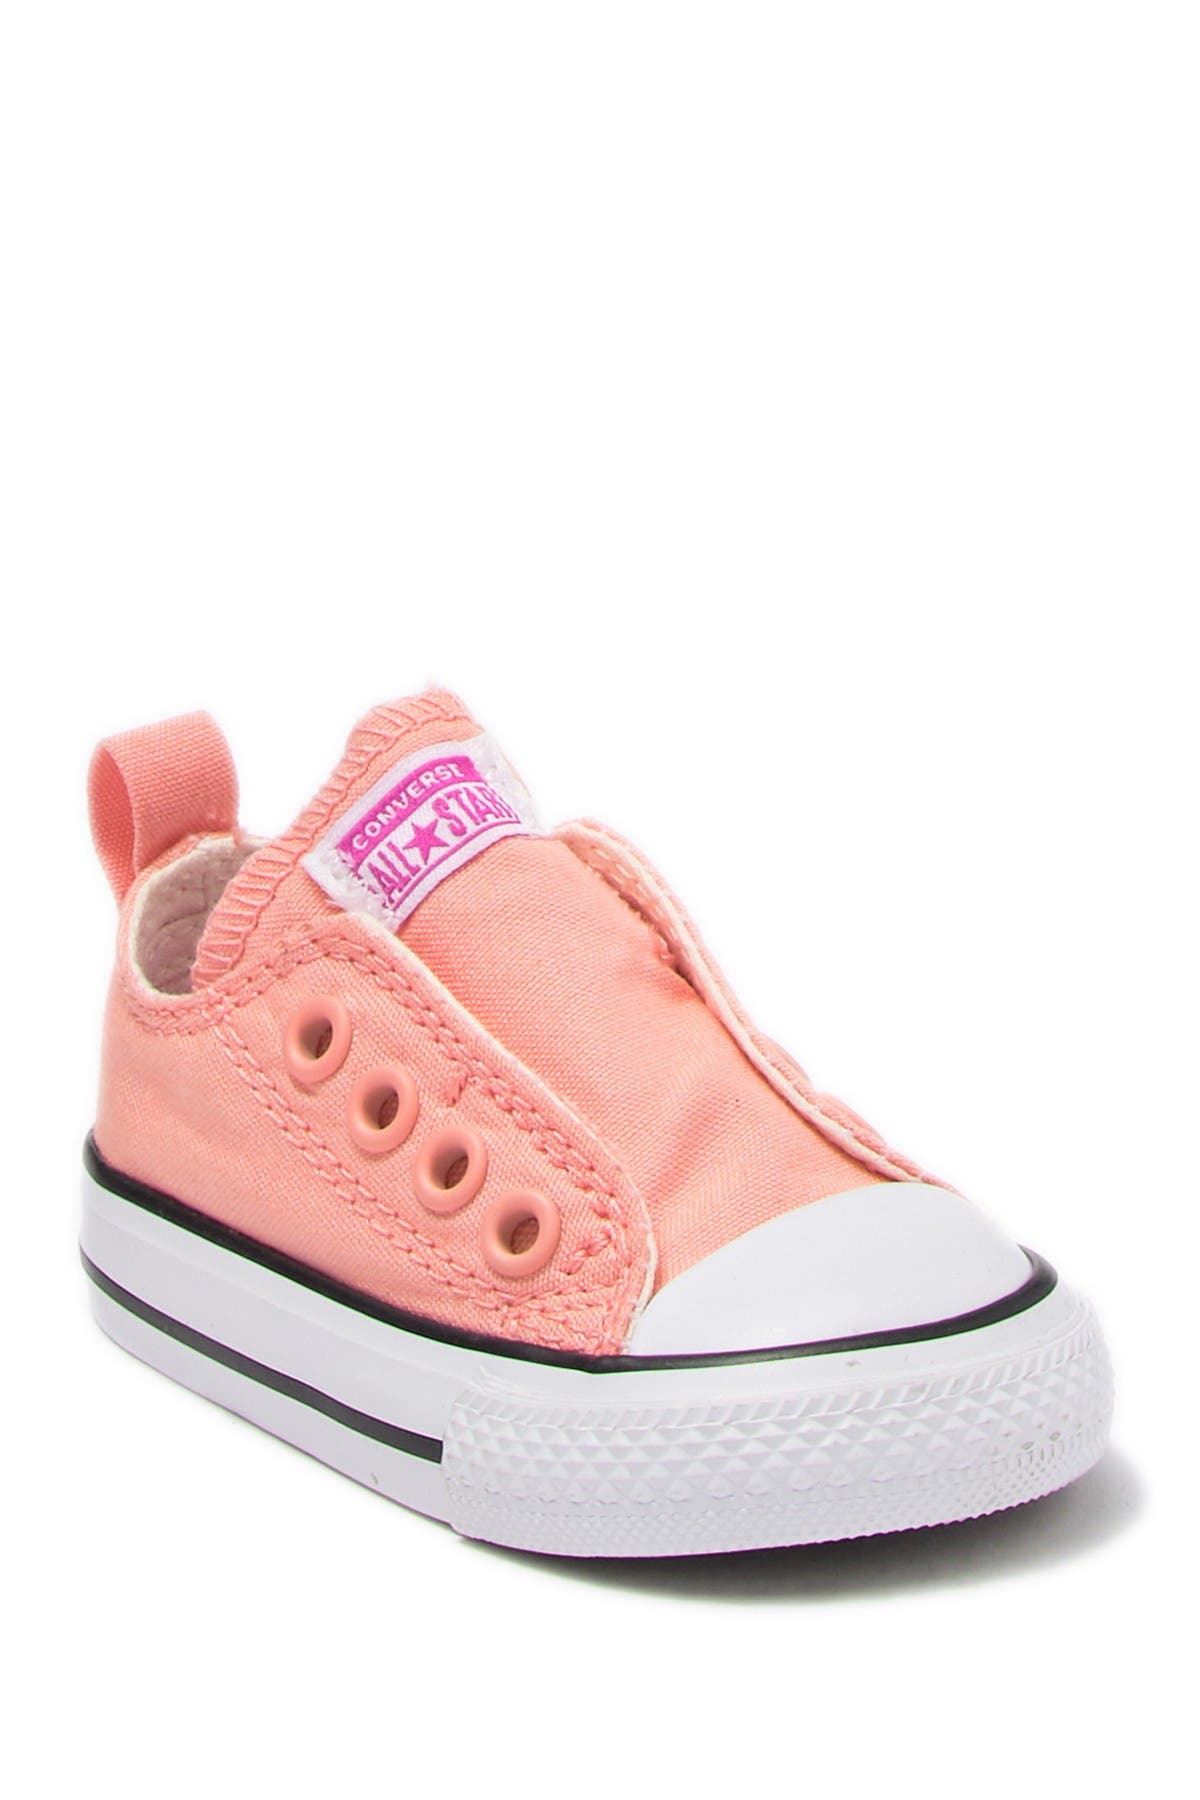 laceless kids sneakers